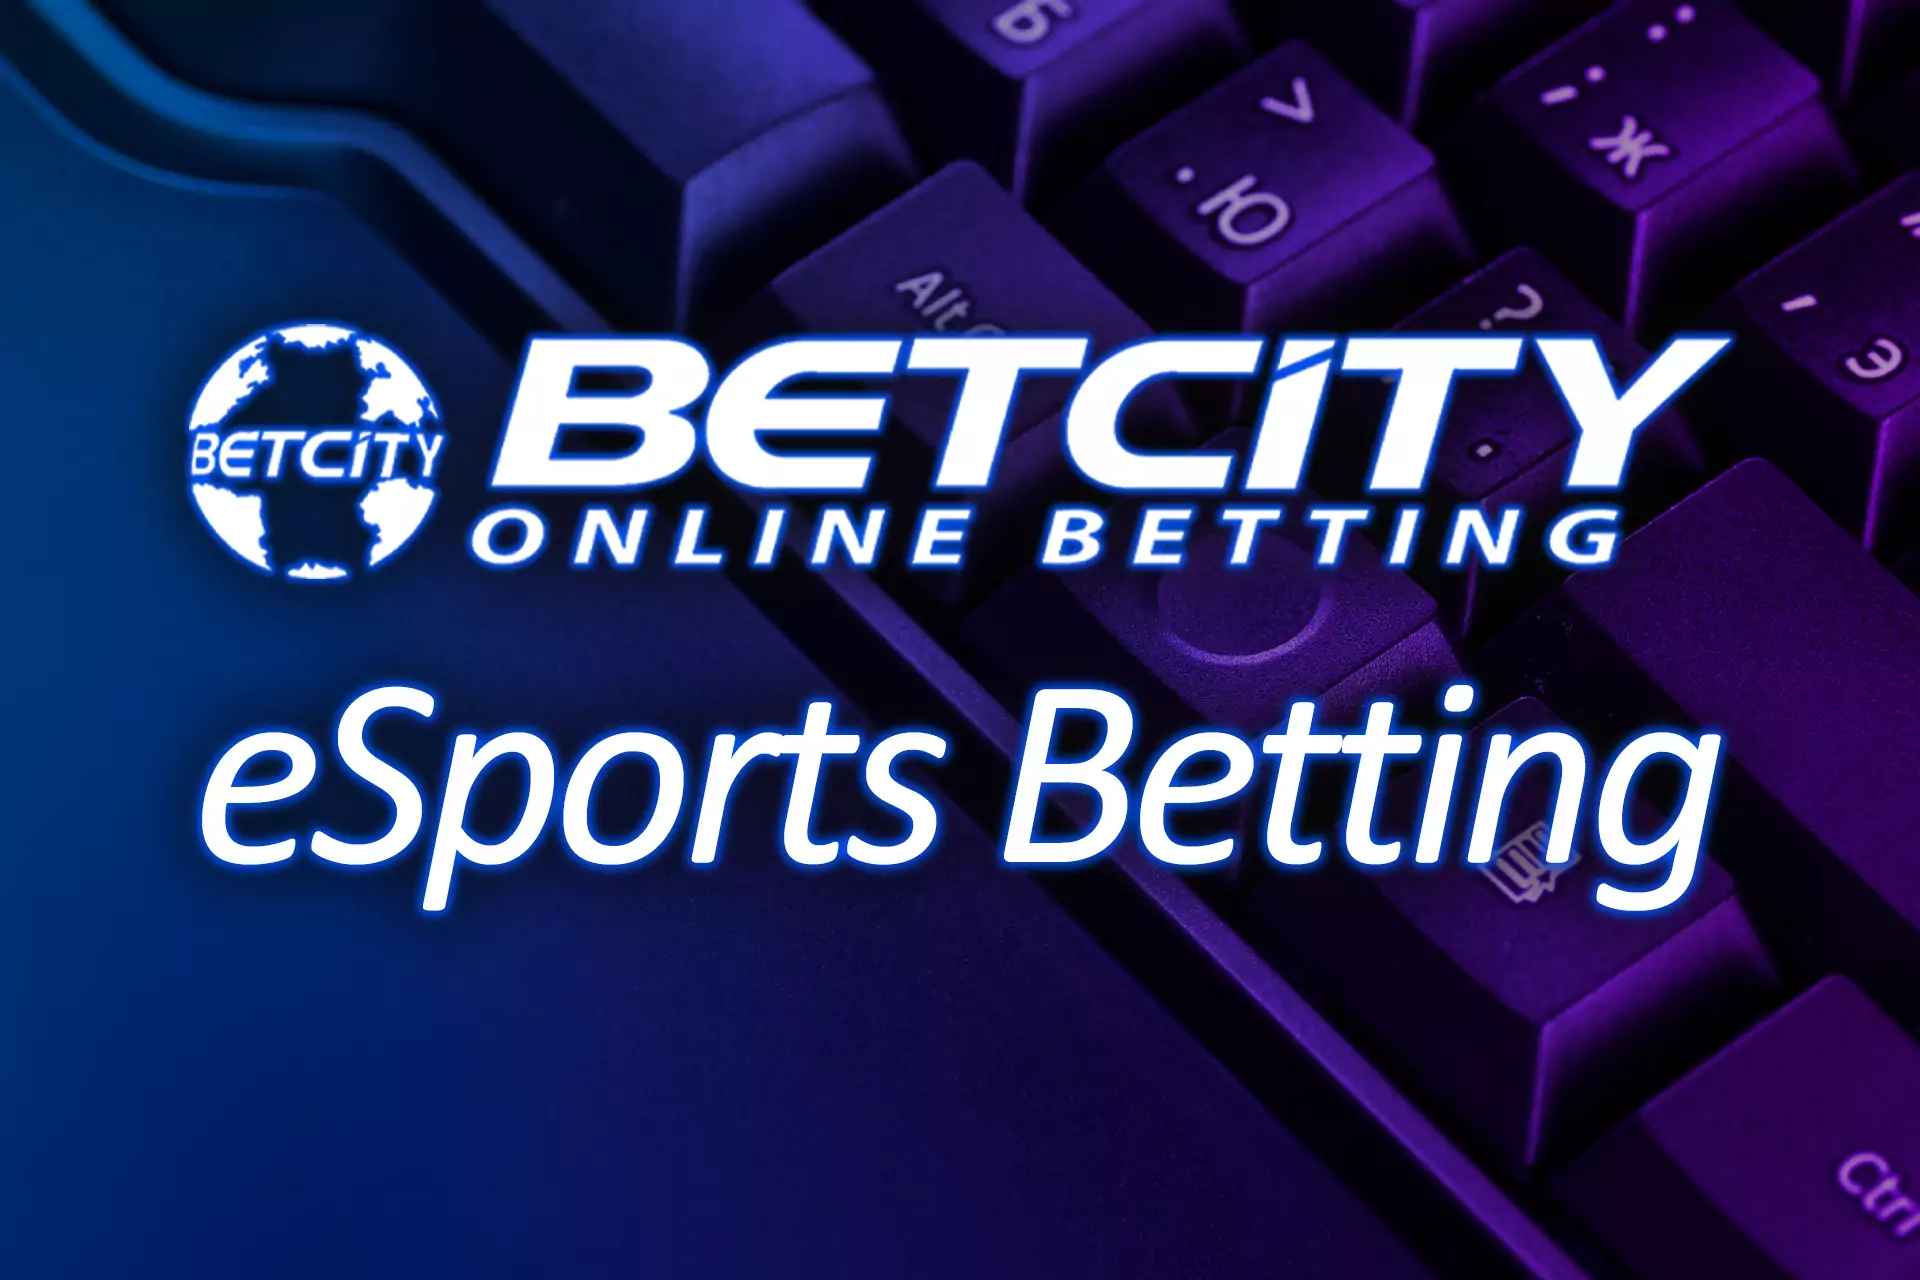 If you like placing bets on esports matches as well you can find some events in the betting list.